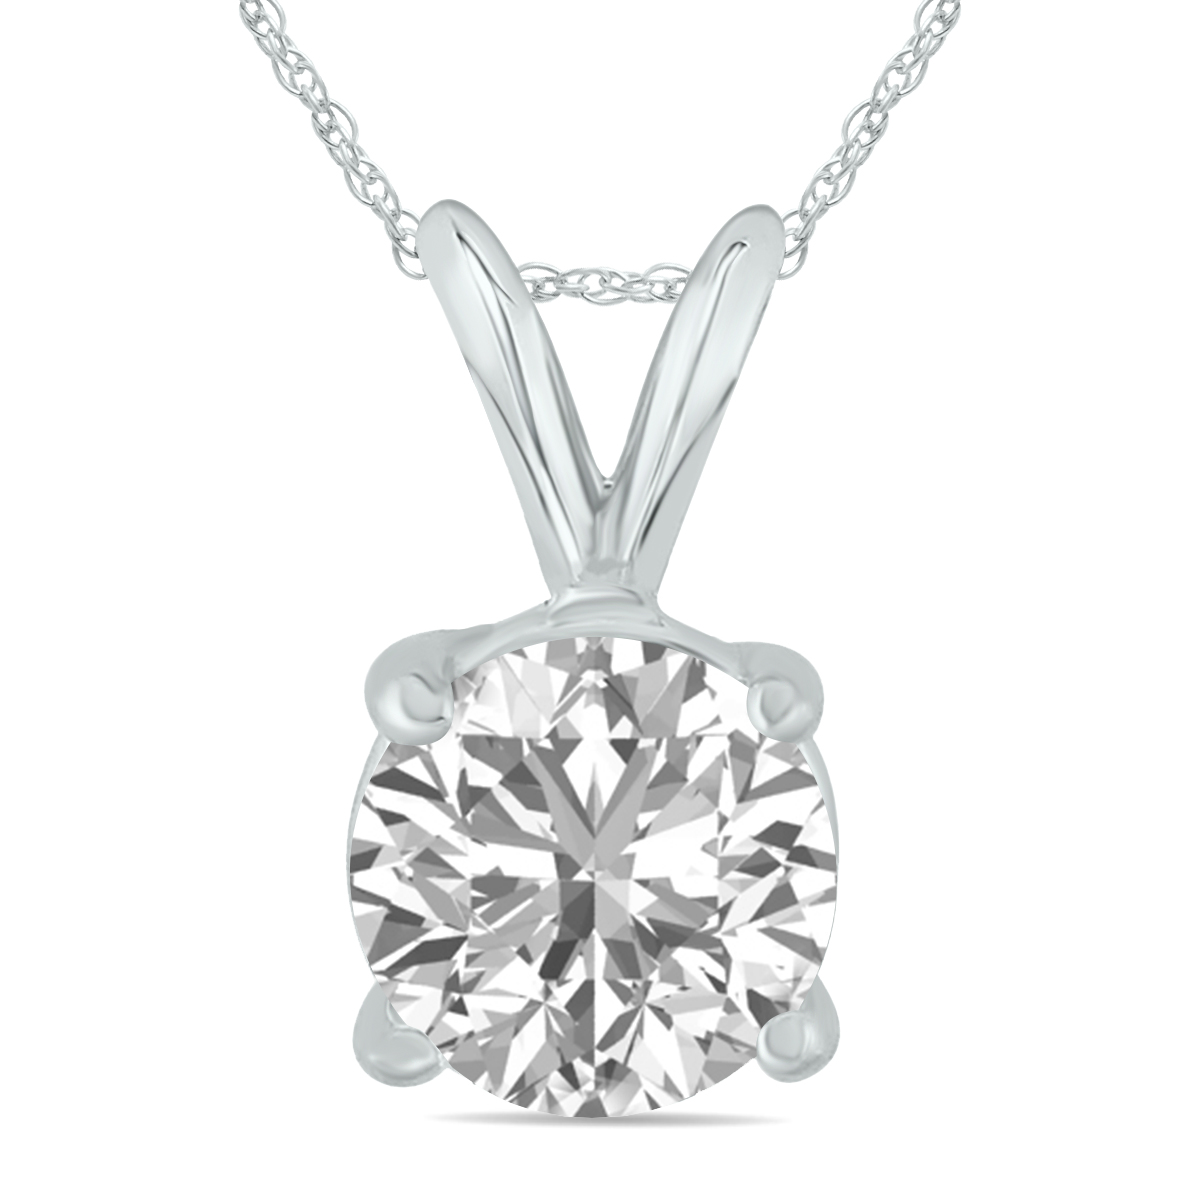 Image of IGI Certified Lab Grown 1 1/4 Carat Diamond Solitaire Pendant in 14K White Gold (I Color SI2 Clarity)